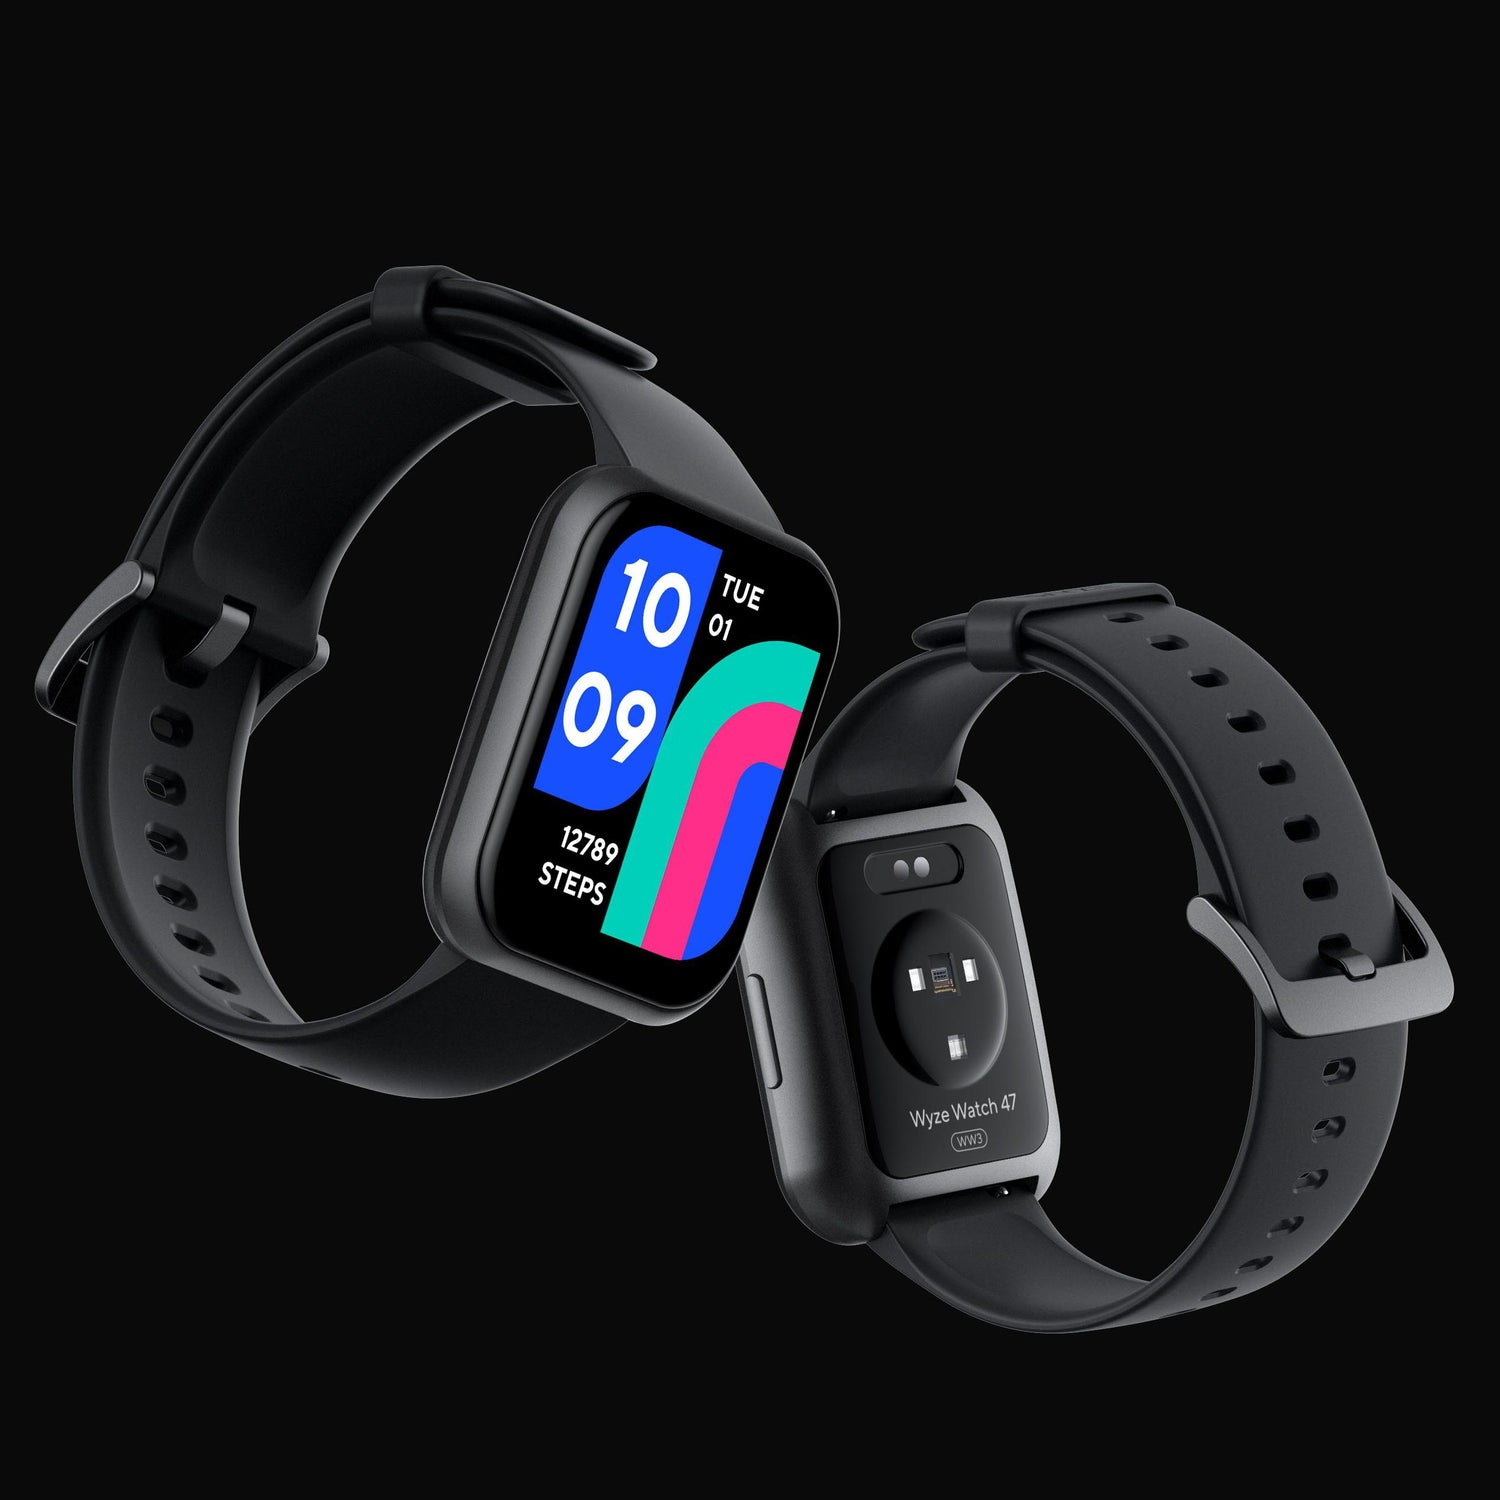 Two Black Wyze Watch 47c. One watch shows watch band and smart digital interface with an app screen open. Second watch shows band and back of the watch face.